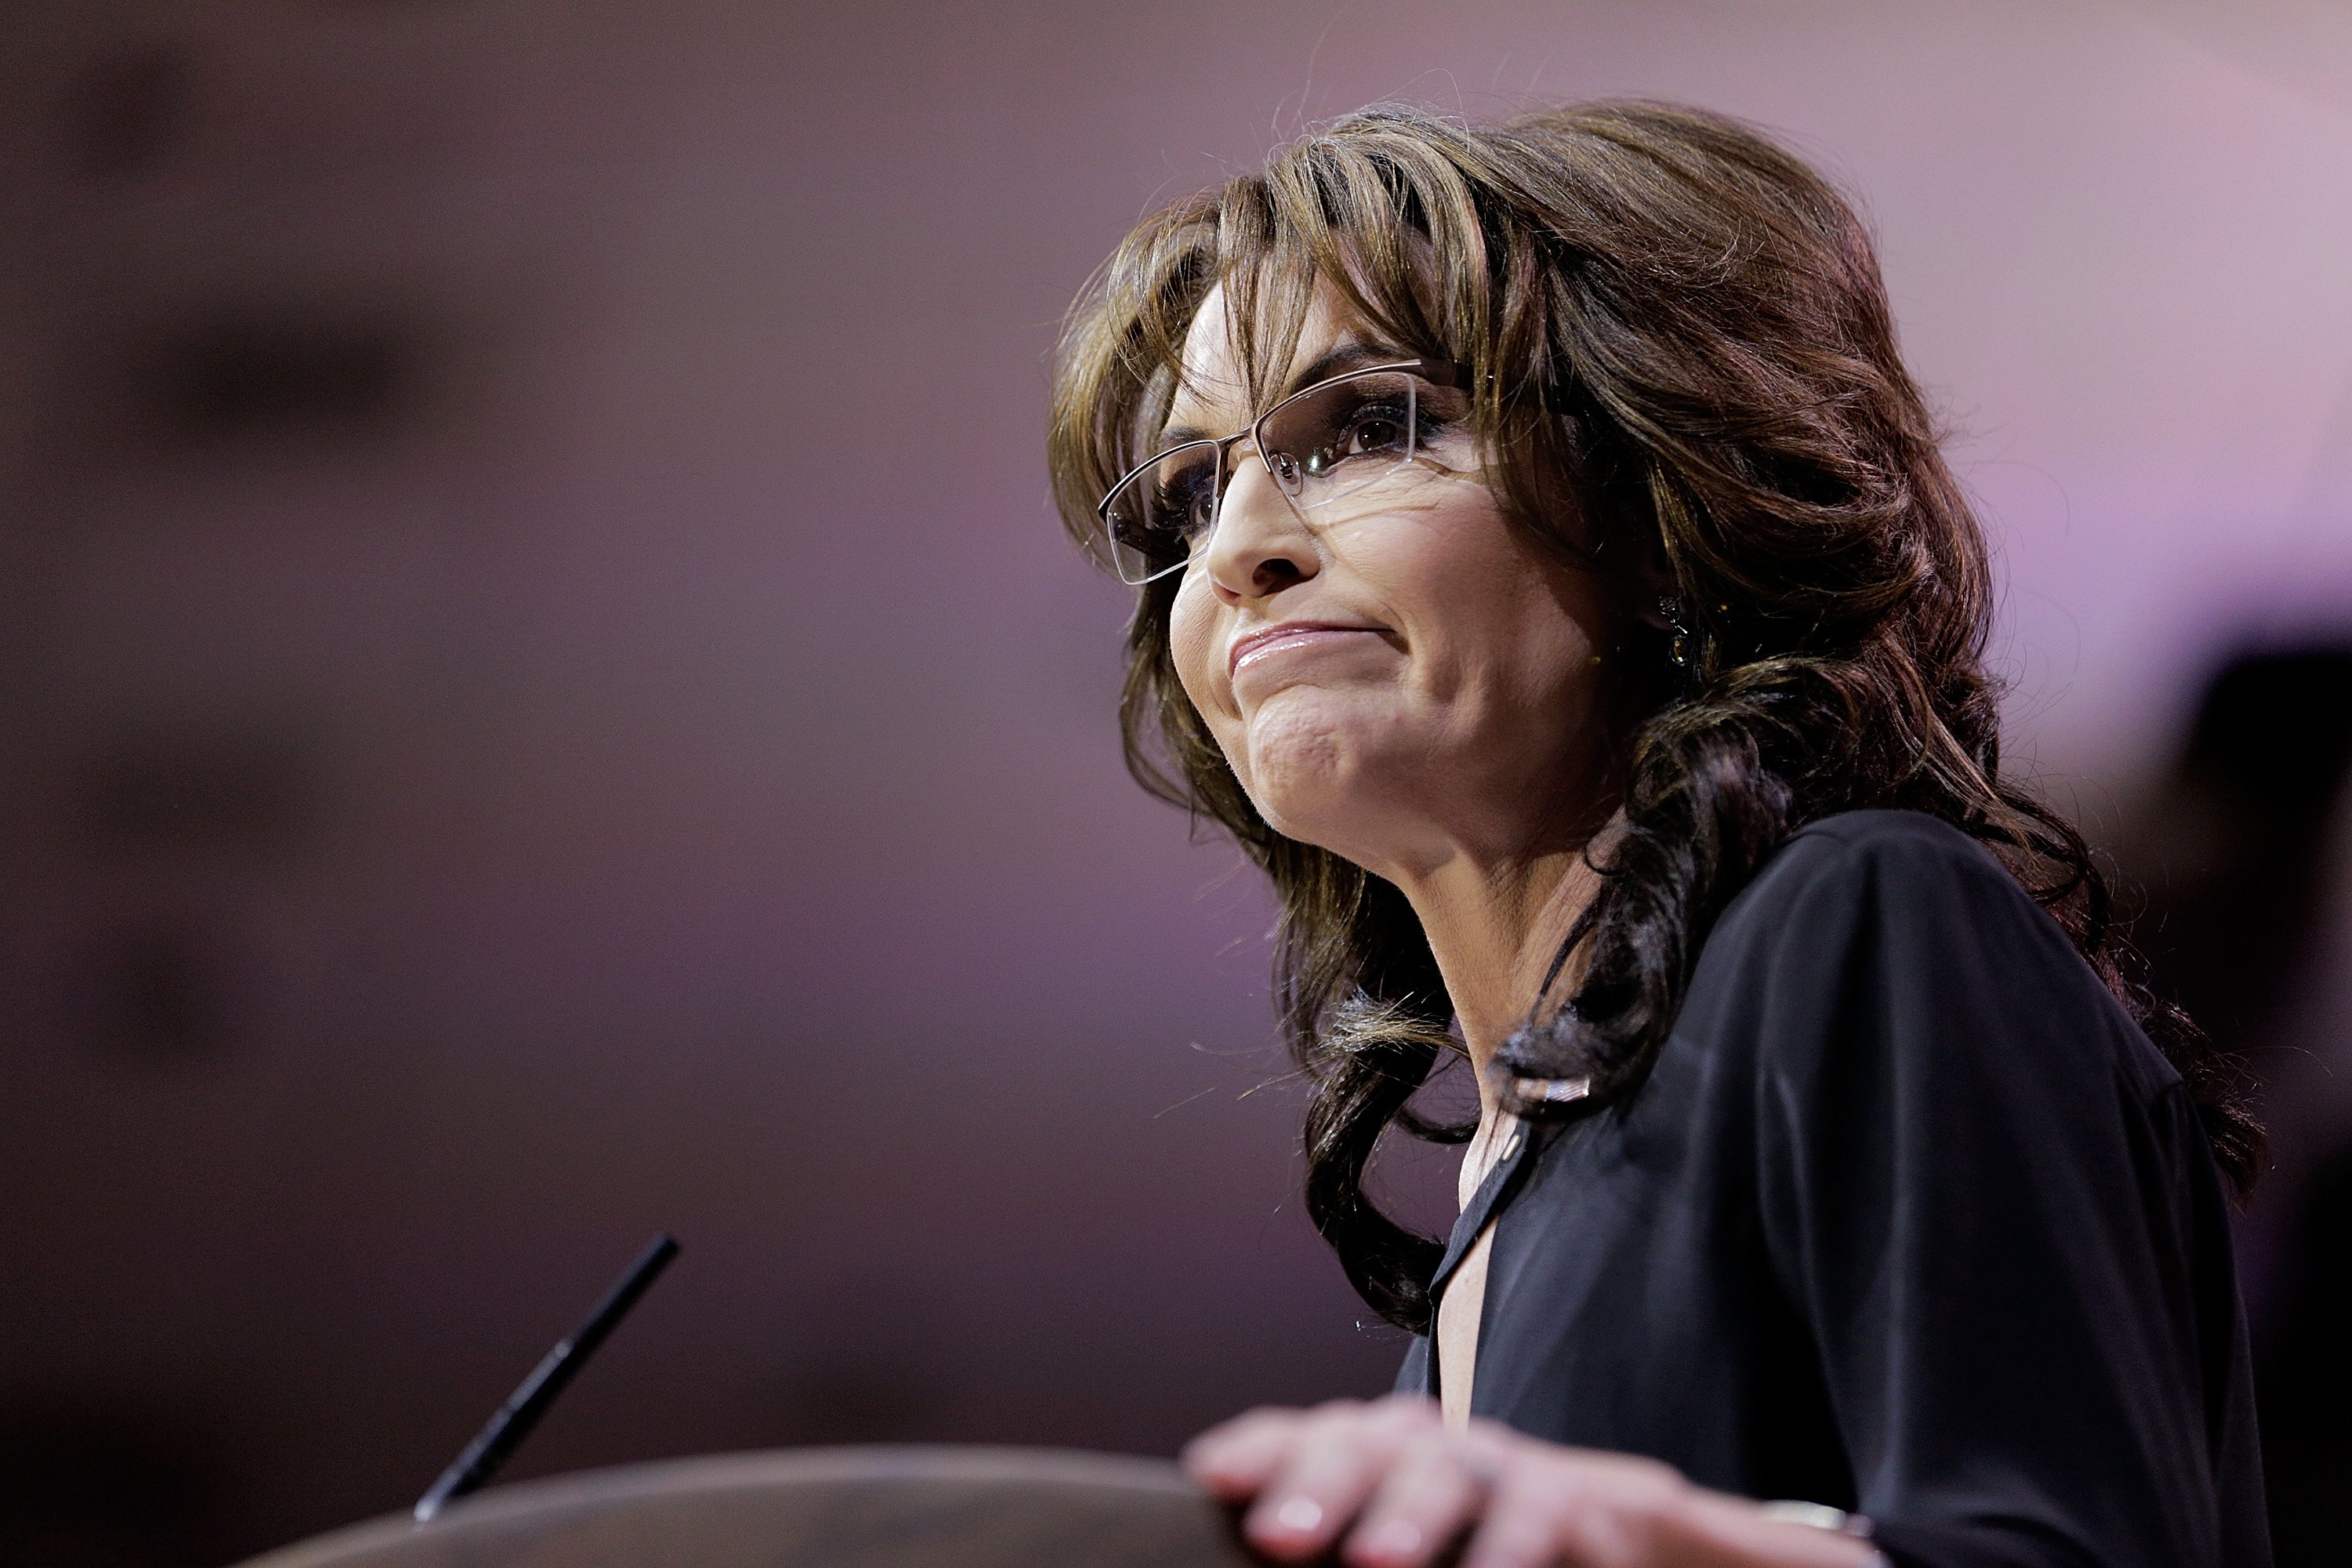 Sarah Palin speaks during the 41st annual Conservative Political Action Conference at the Gaylord International Hotel and Conference Center on March 8, 2014 in National Harbor, Md. (T.J. Kirkpatrick—Getty Images)